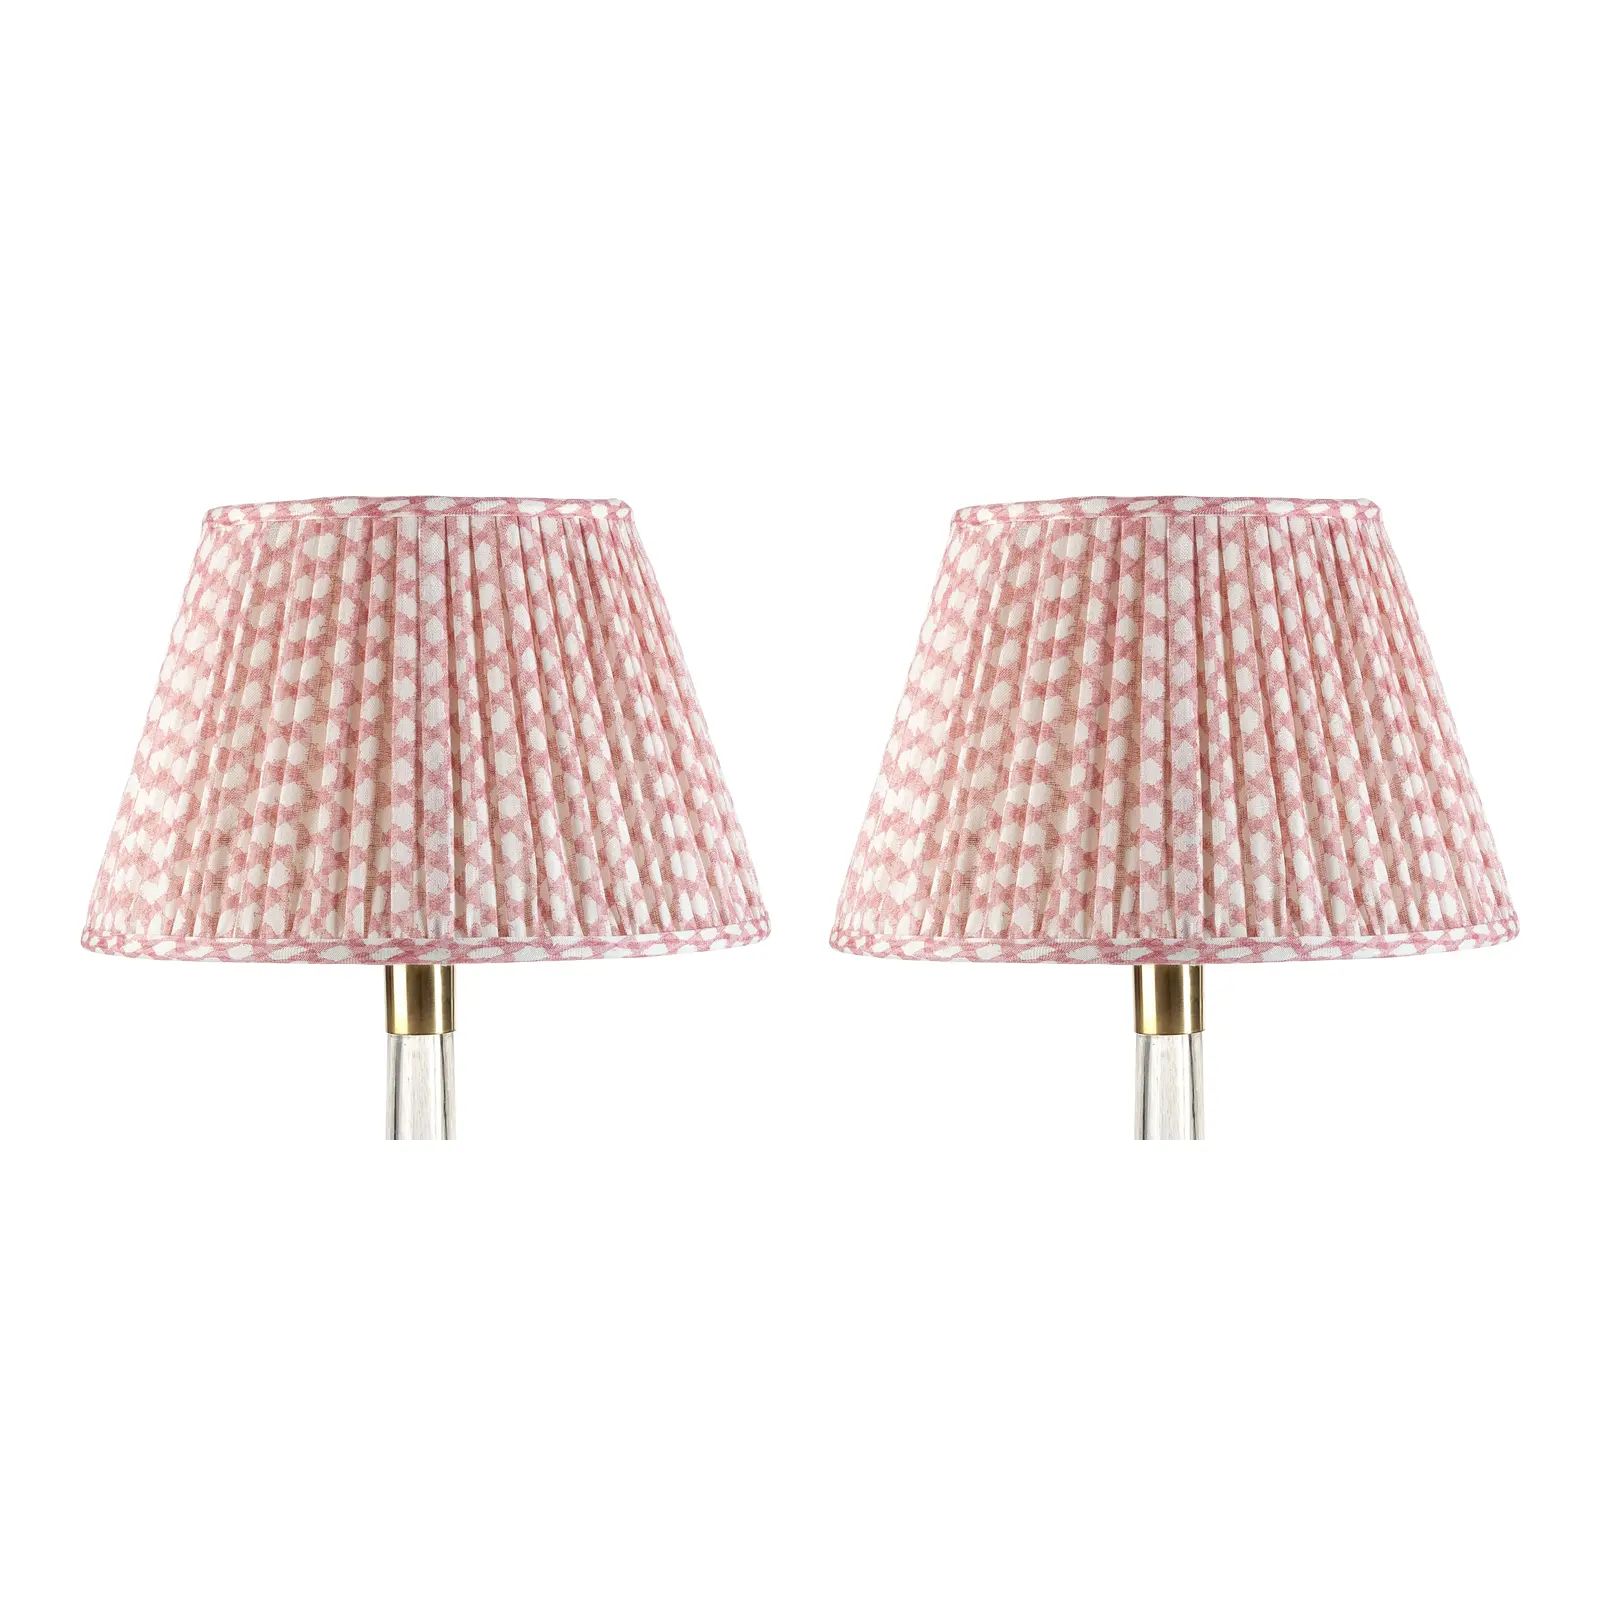 Fermoie Gathered Linen Lampshade in Pink Wicker, 6 Inch, Set of 2 | Chairish